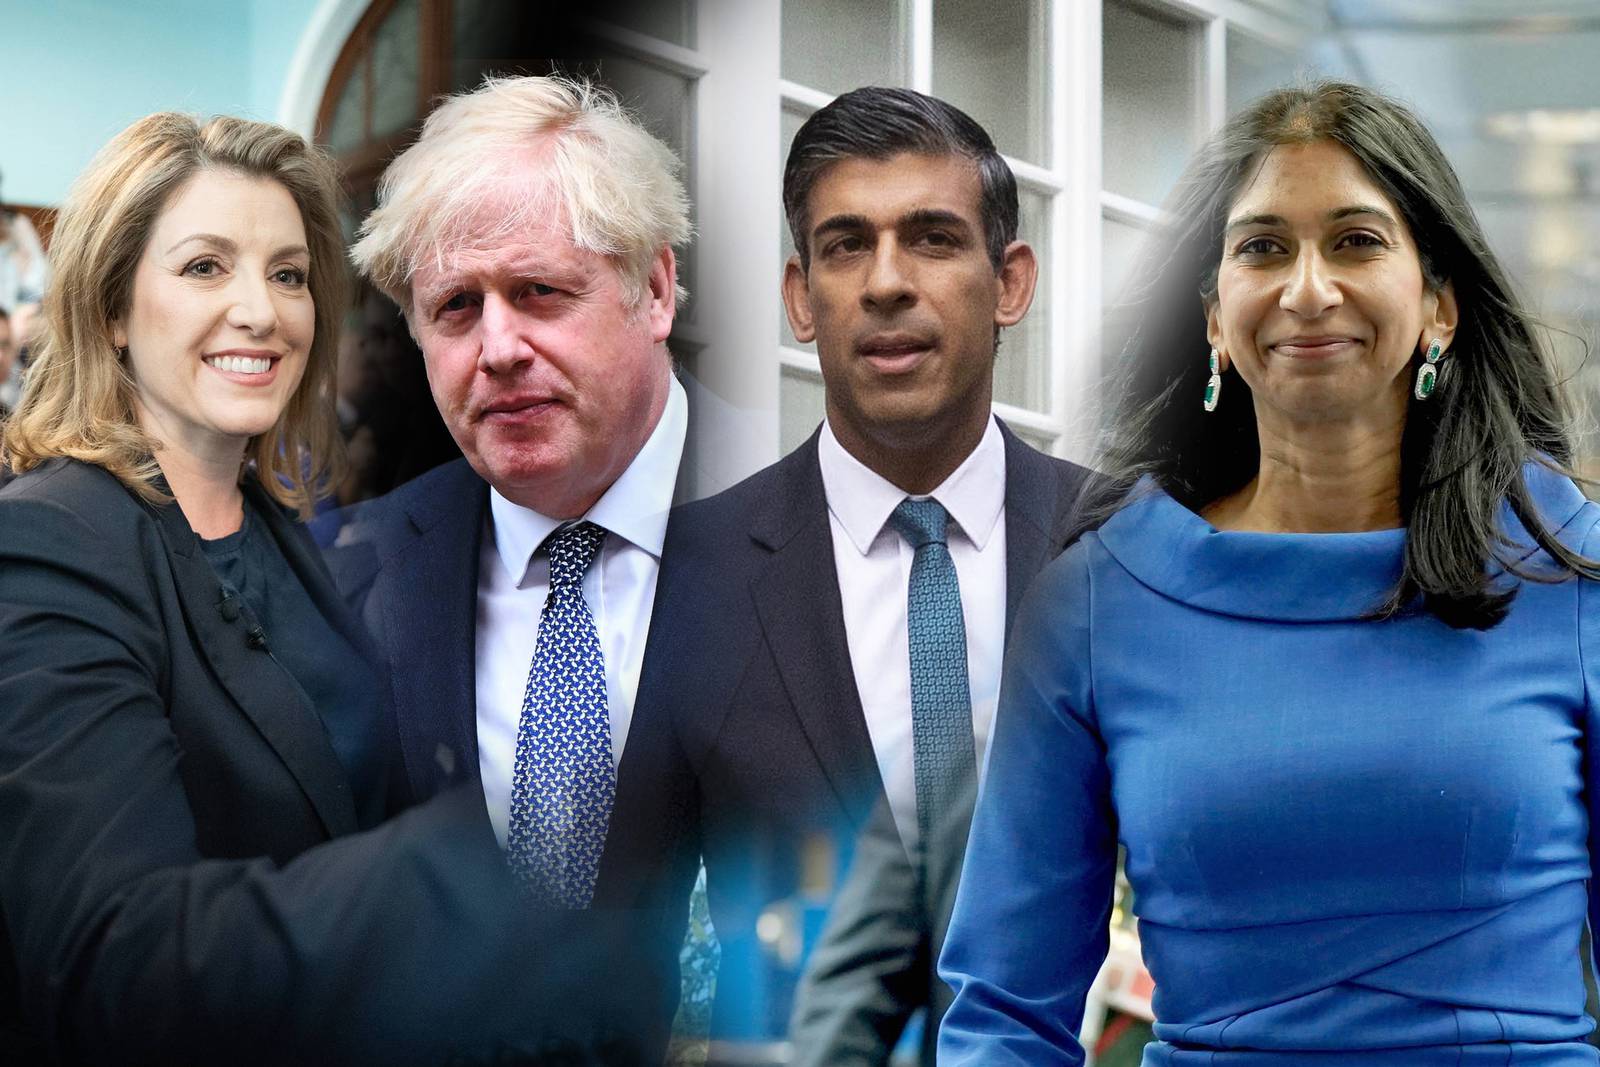 Would-be candidates include cabinet member Penny Mordaunt; former prime minister Boris Johnson; former chancellor Rishi Sunak and recently resigned former home secretary Suella Braverman